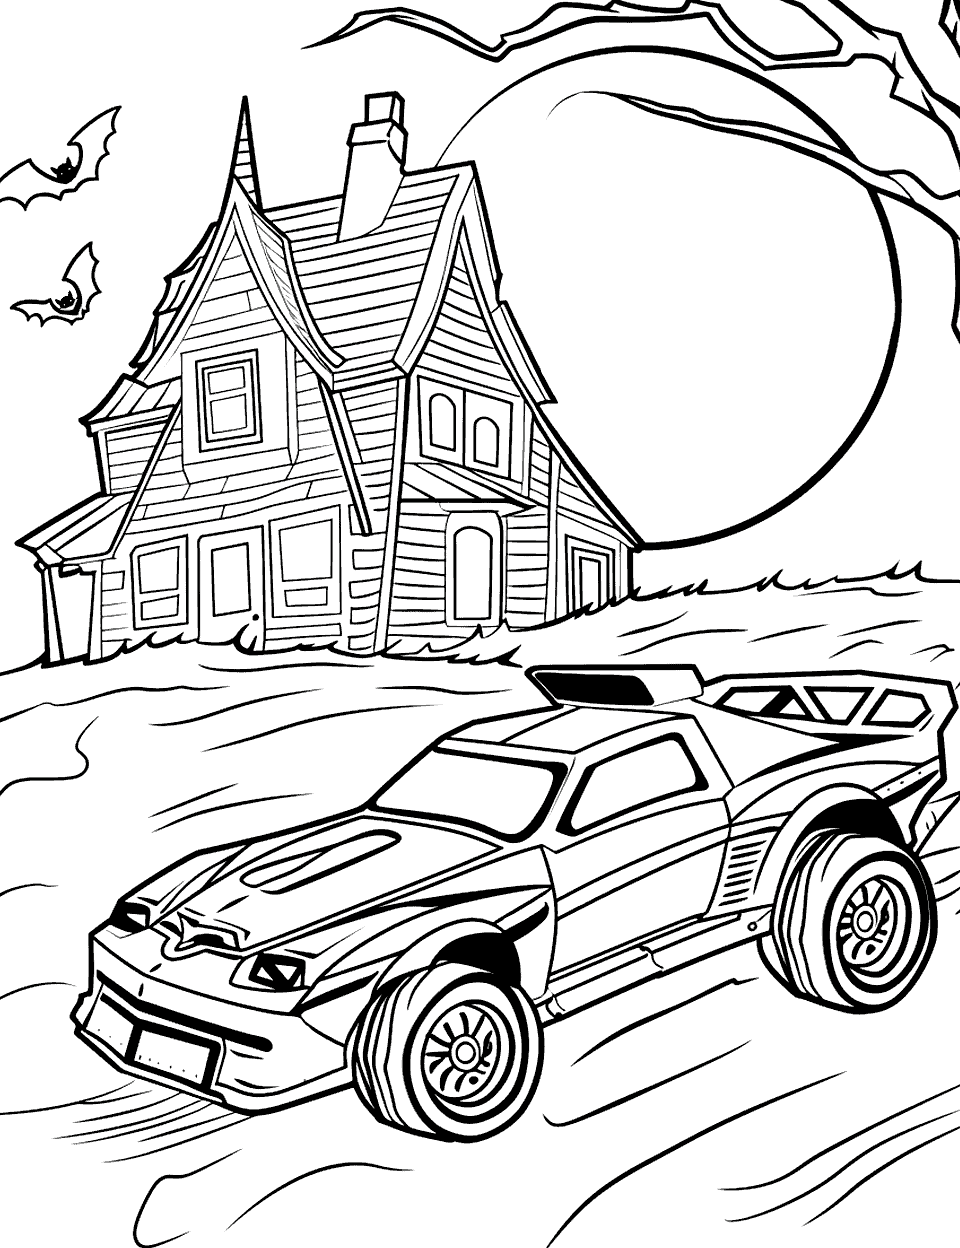 Halloween Haunted Race Coloring Page - A Hot Wheels car racing past a Halloween haunted house, with the moon overhead.